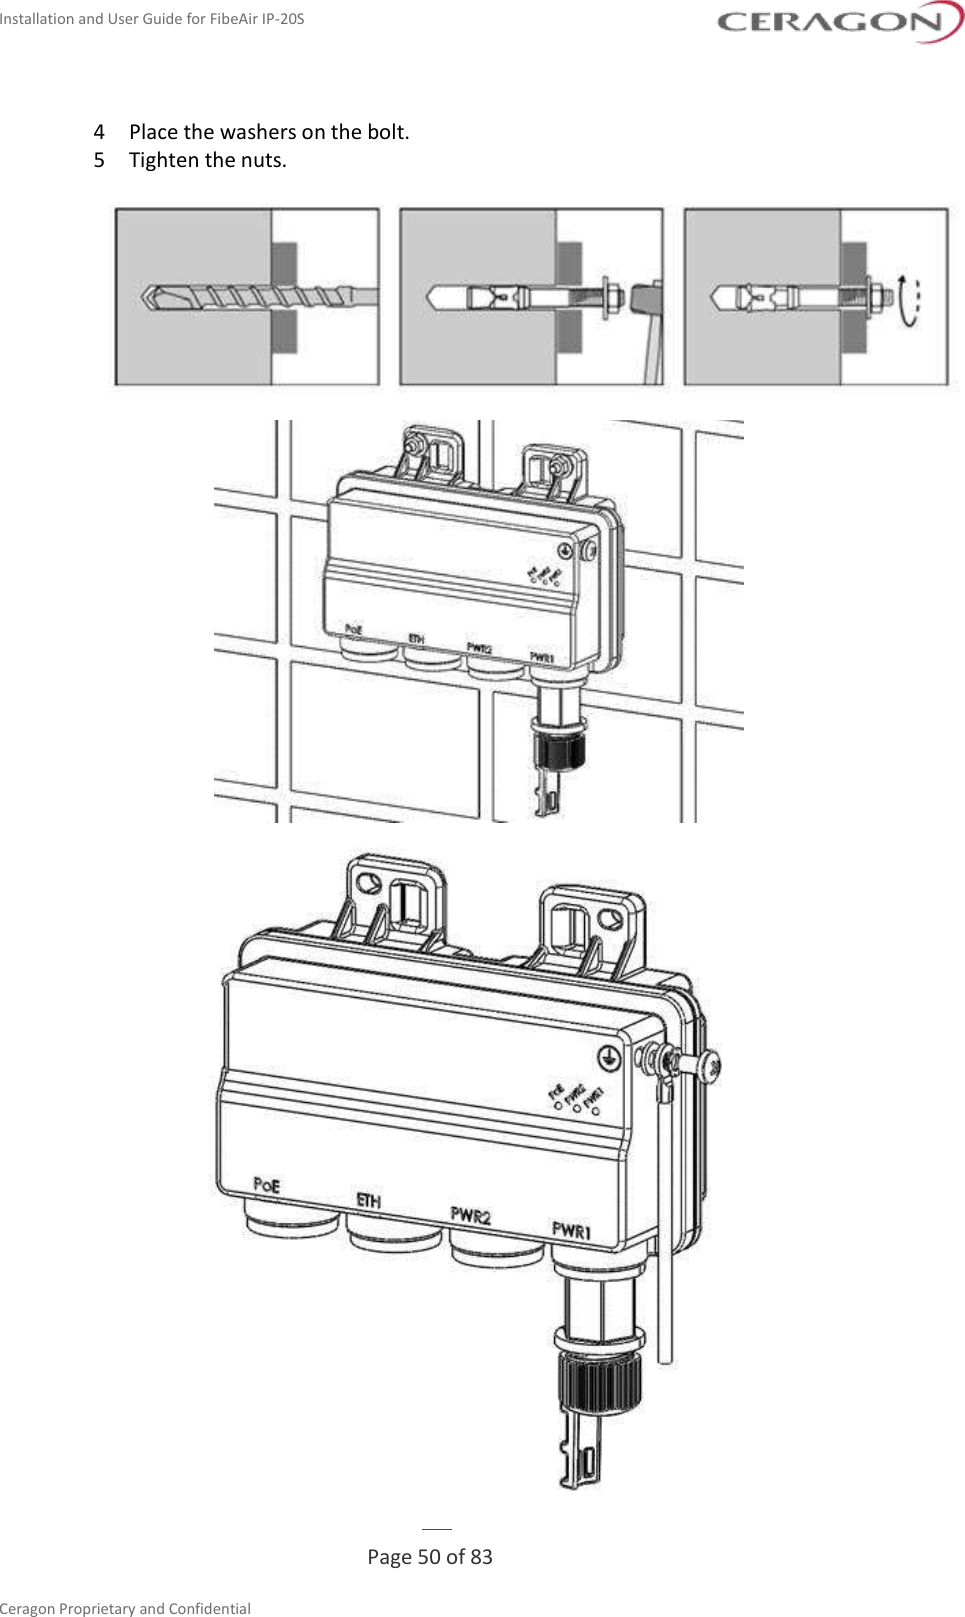 Installation and User Guide for FibeAir IP-20S   Page 50 of 83  Ceragon Proprietary and Confidential     4  Place the washers on the bolt. 5  Tighten the nuts.      